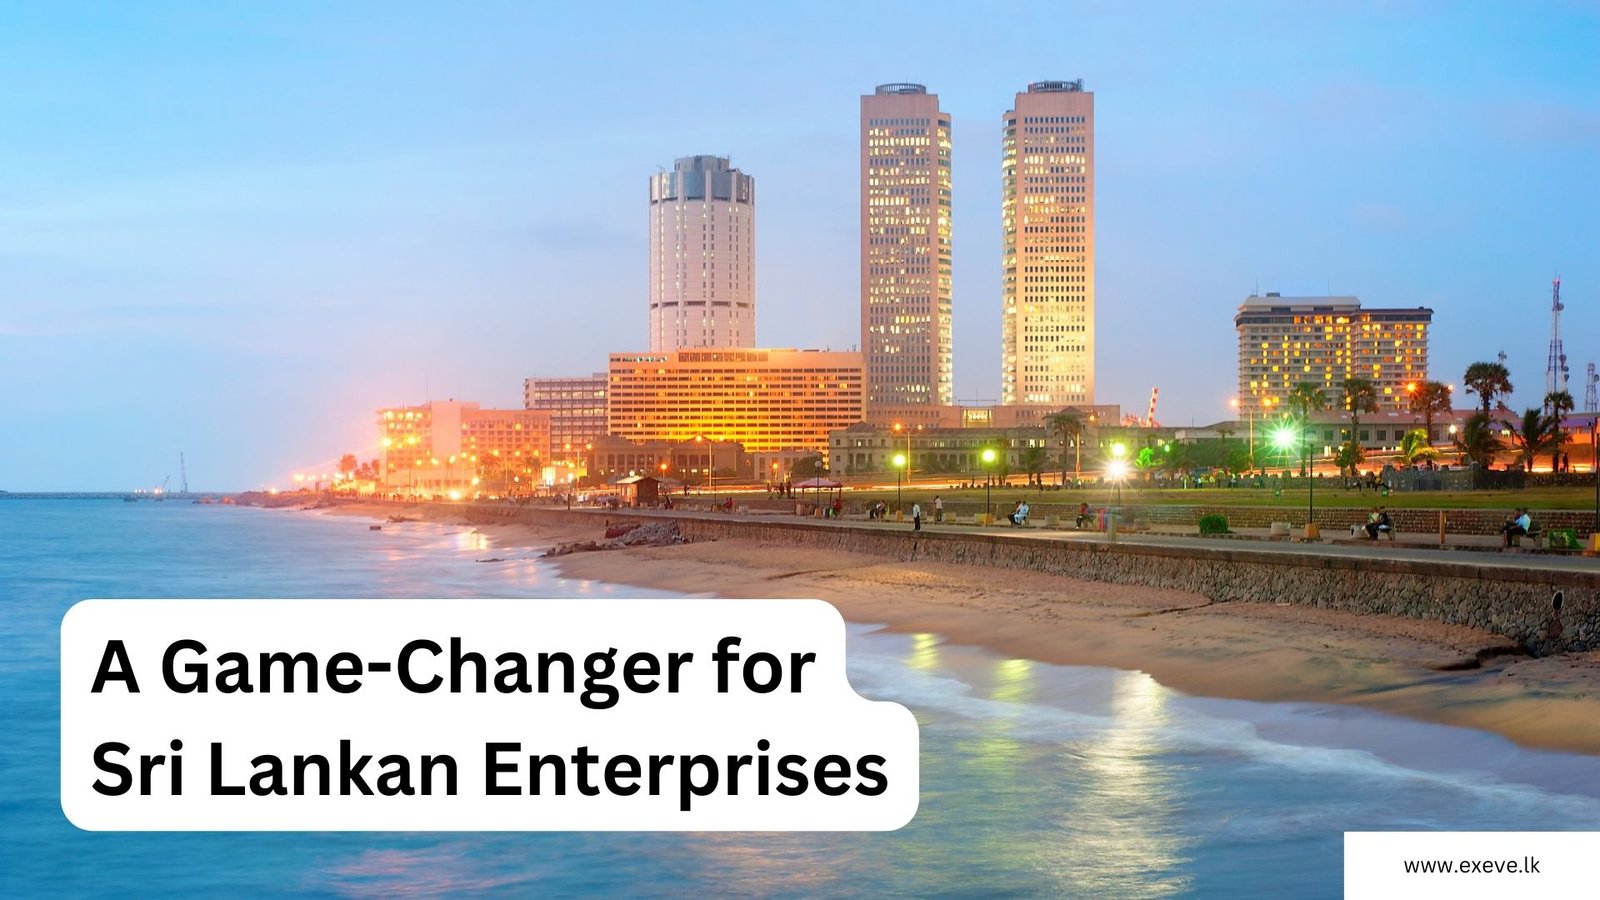 Empower Your Business with EXEVE: A Game-Changer for Sri Lankan Enterprises